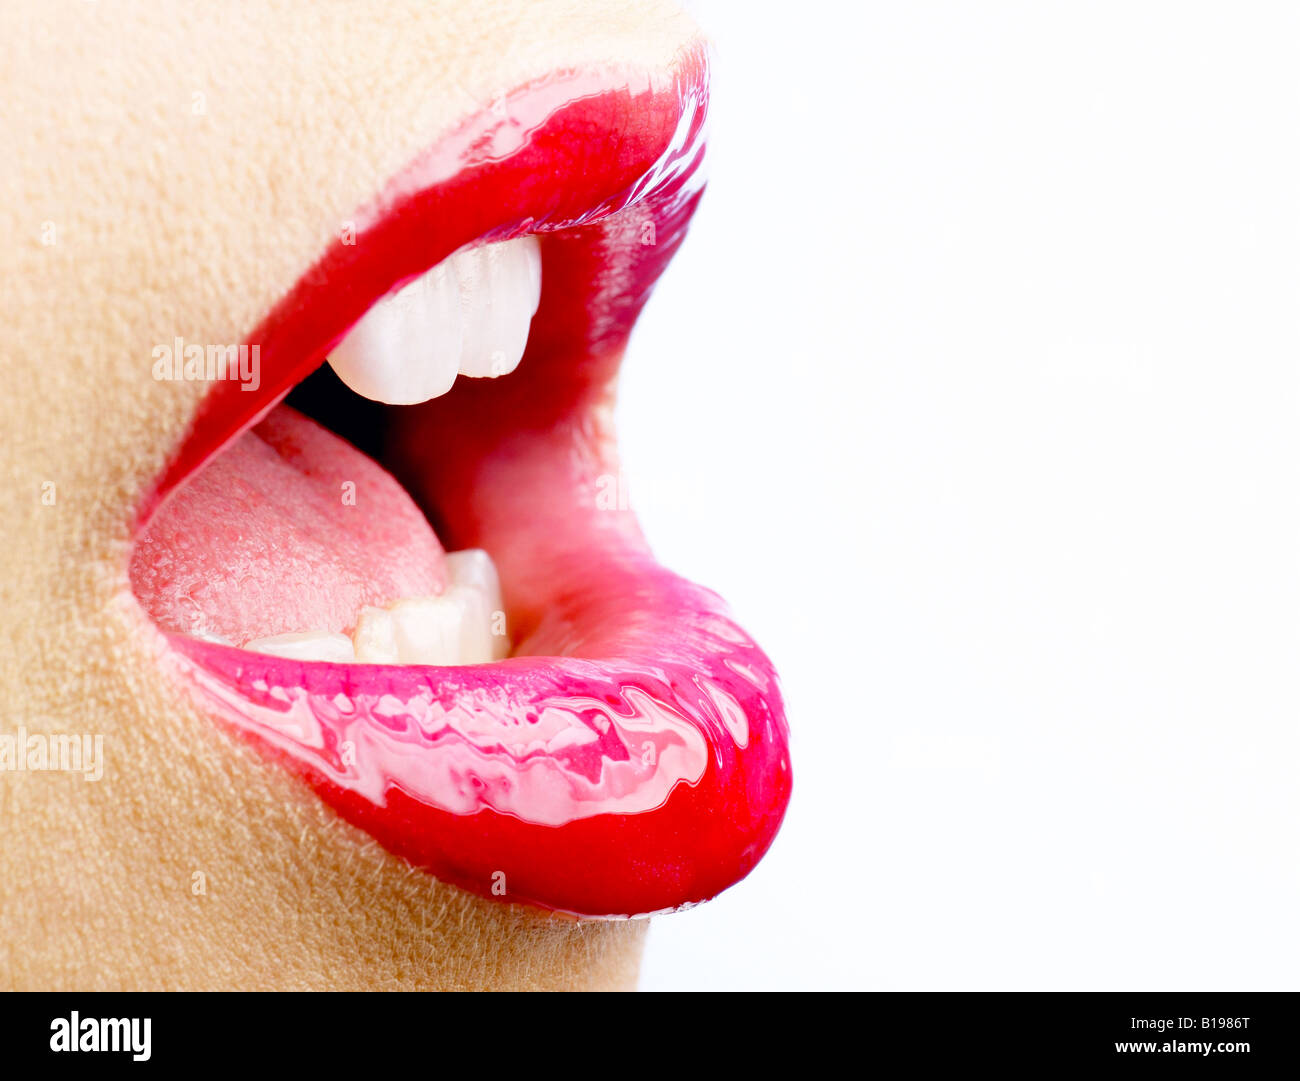 close up of a 26 year old lips red lipstick, Montreal, Quebec, Canada Stock Photo